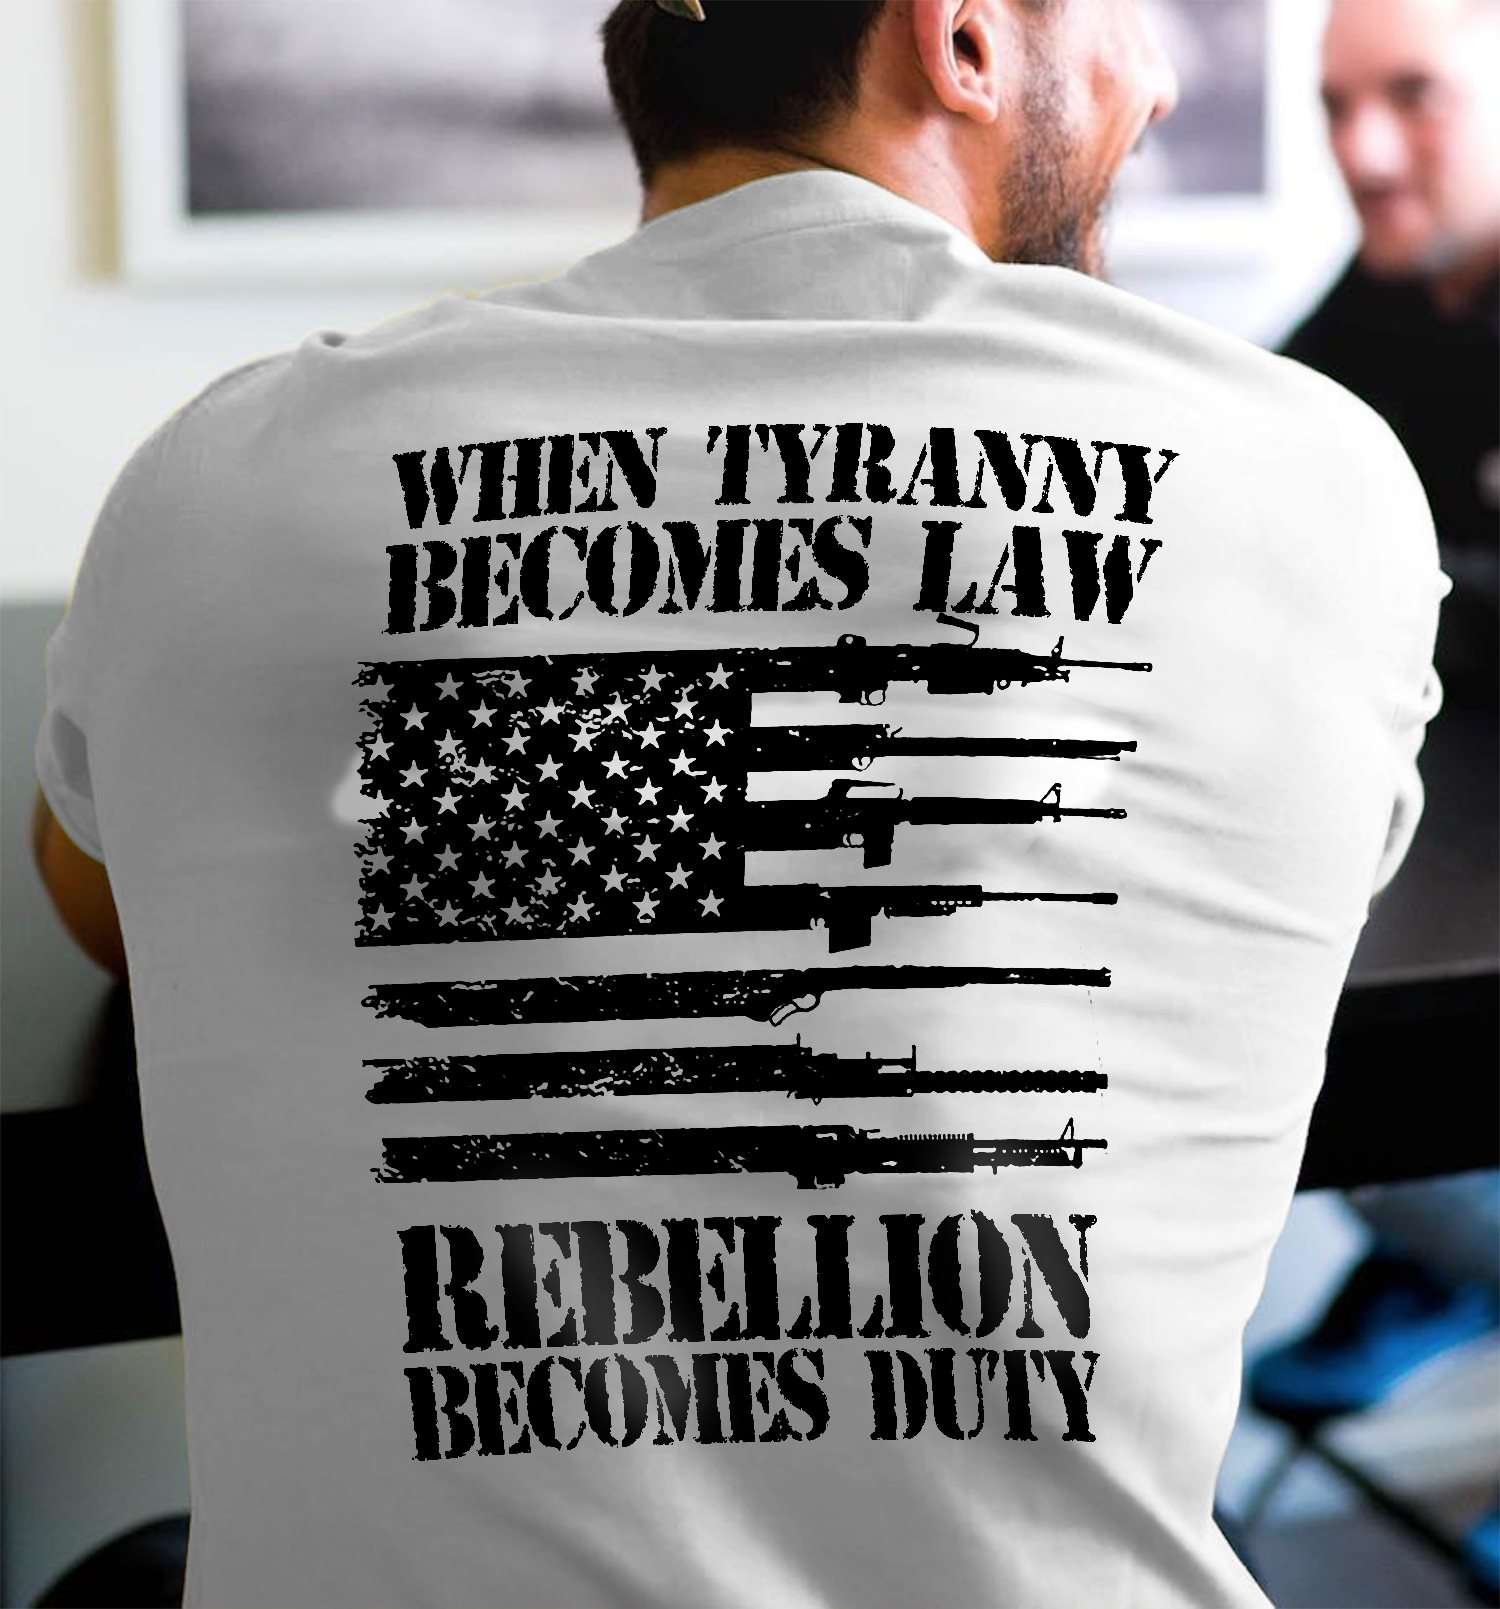 Ameica Guns - When tyranny becomes law rebellion becomes duty